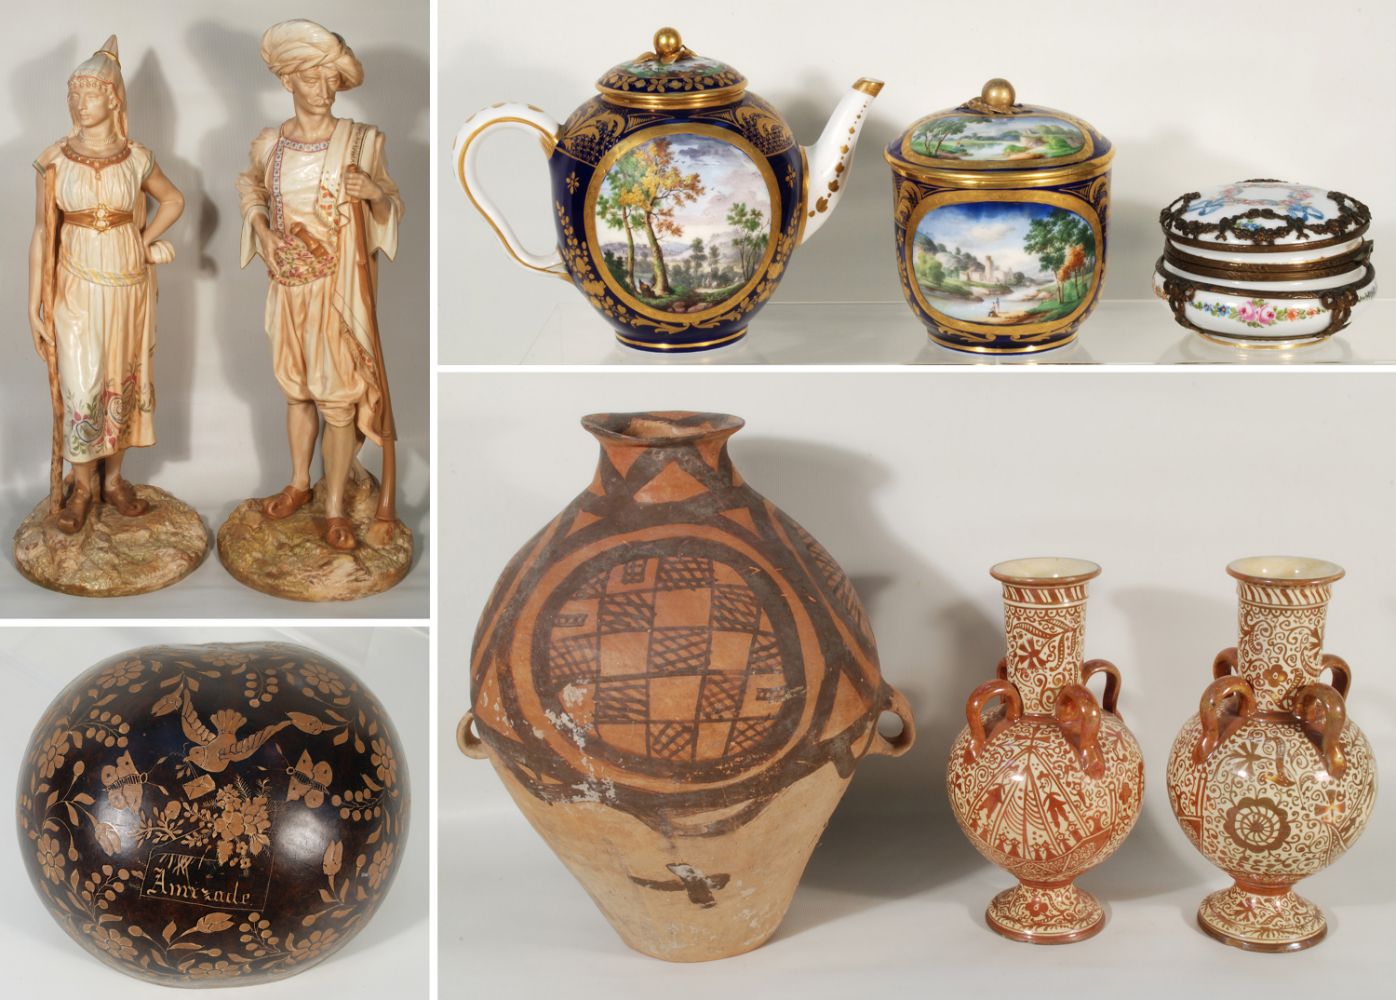 Online Only March Auction of Miscellaneous Objets d'Art, Collectables, Porcelain, Glass, Antique & Country Furniture